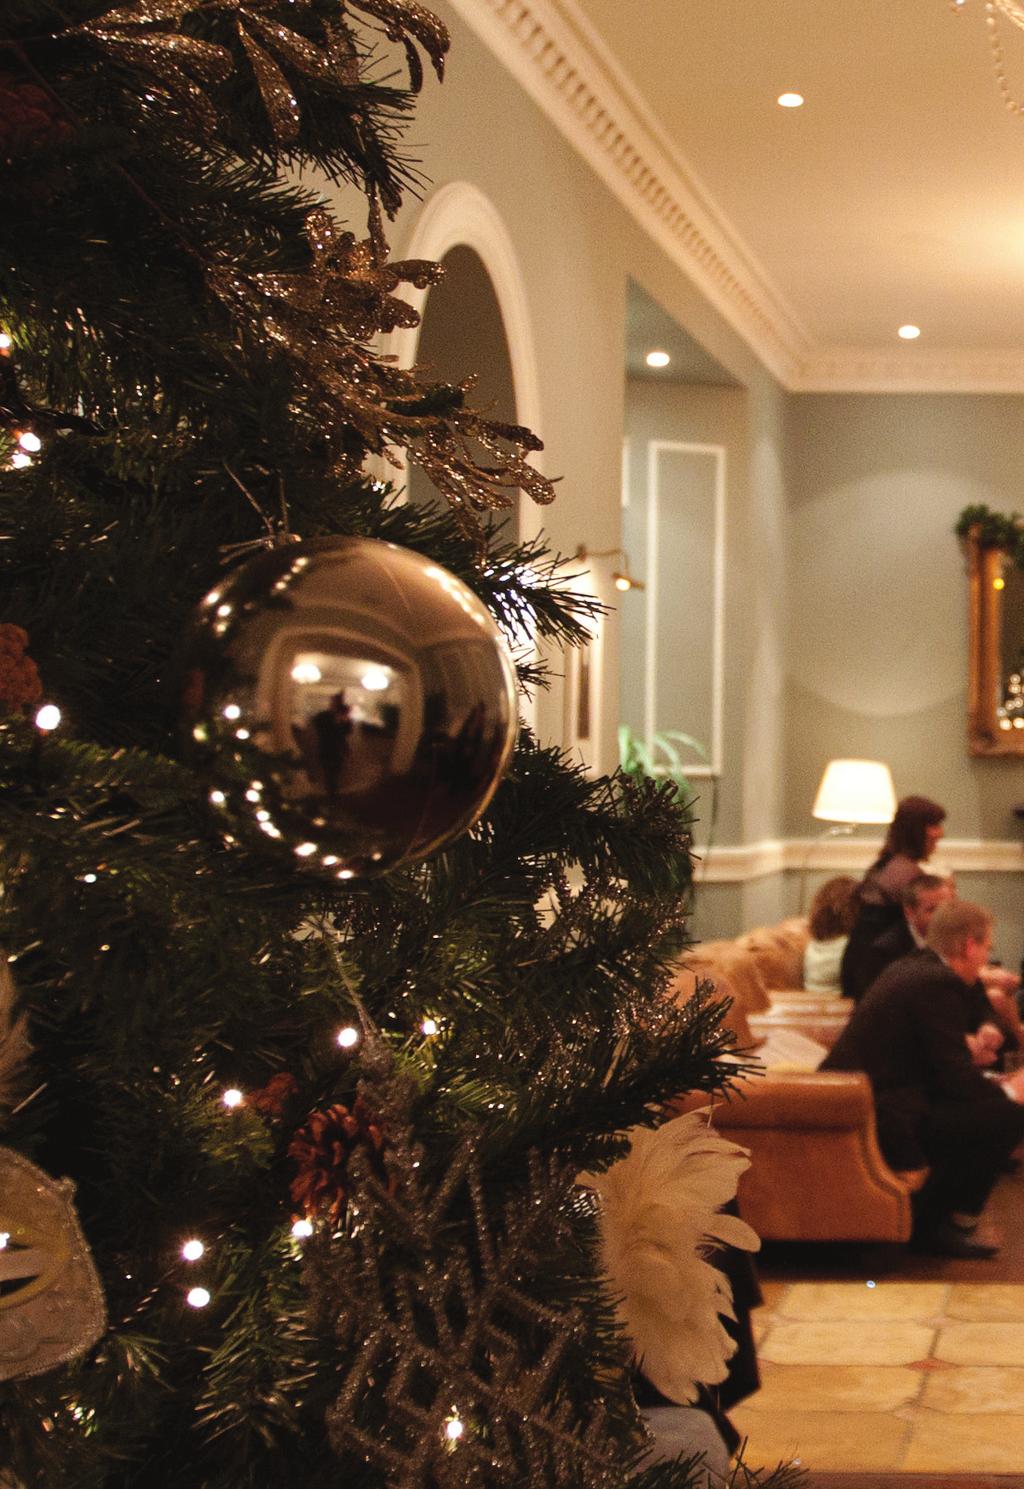 Christmas Party Nights 2013/14 Come and join us over the festive period in the elegant, traditional surroundings of the Sands Restaurant which has been awarded an AA Rosette for outstanding cuisine.